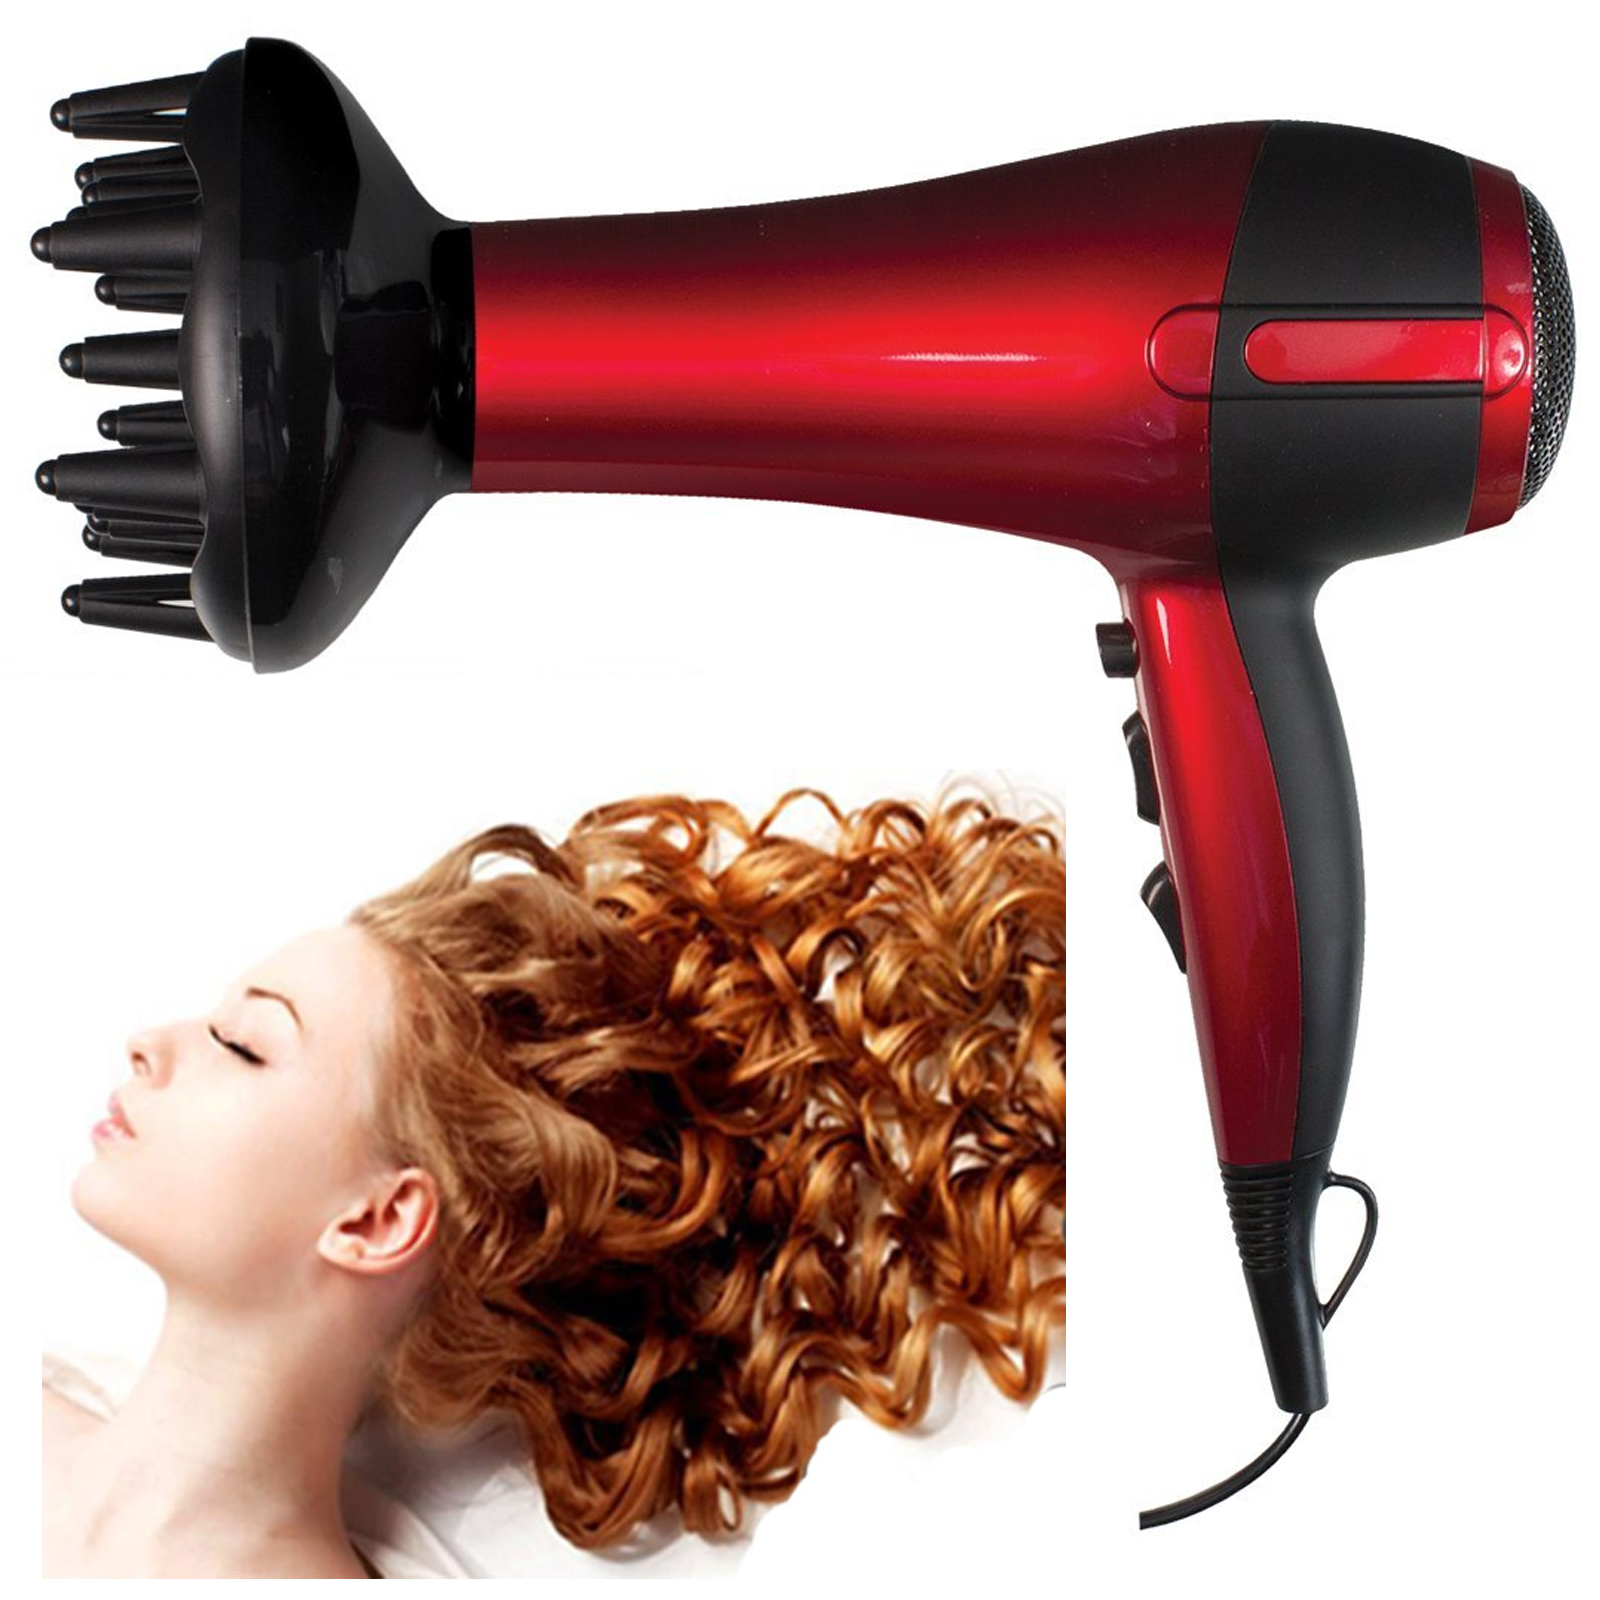 Red Hot Professional Style 2200W Hair Dryer w/ Diffuser & Nozzle Salon